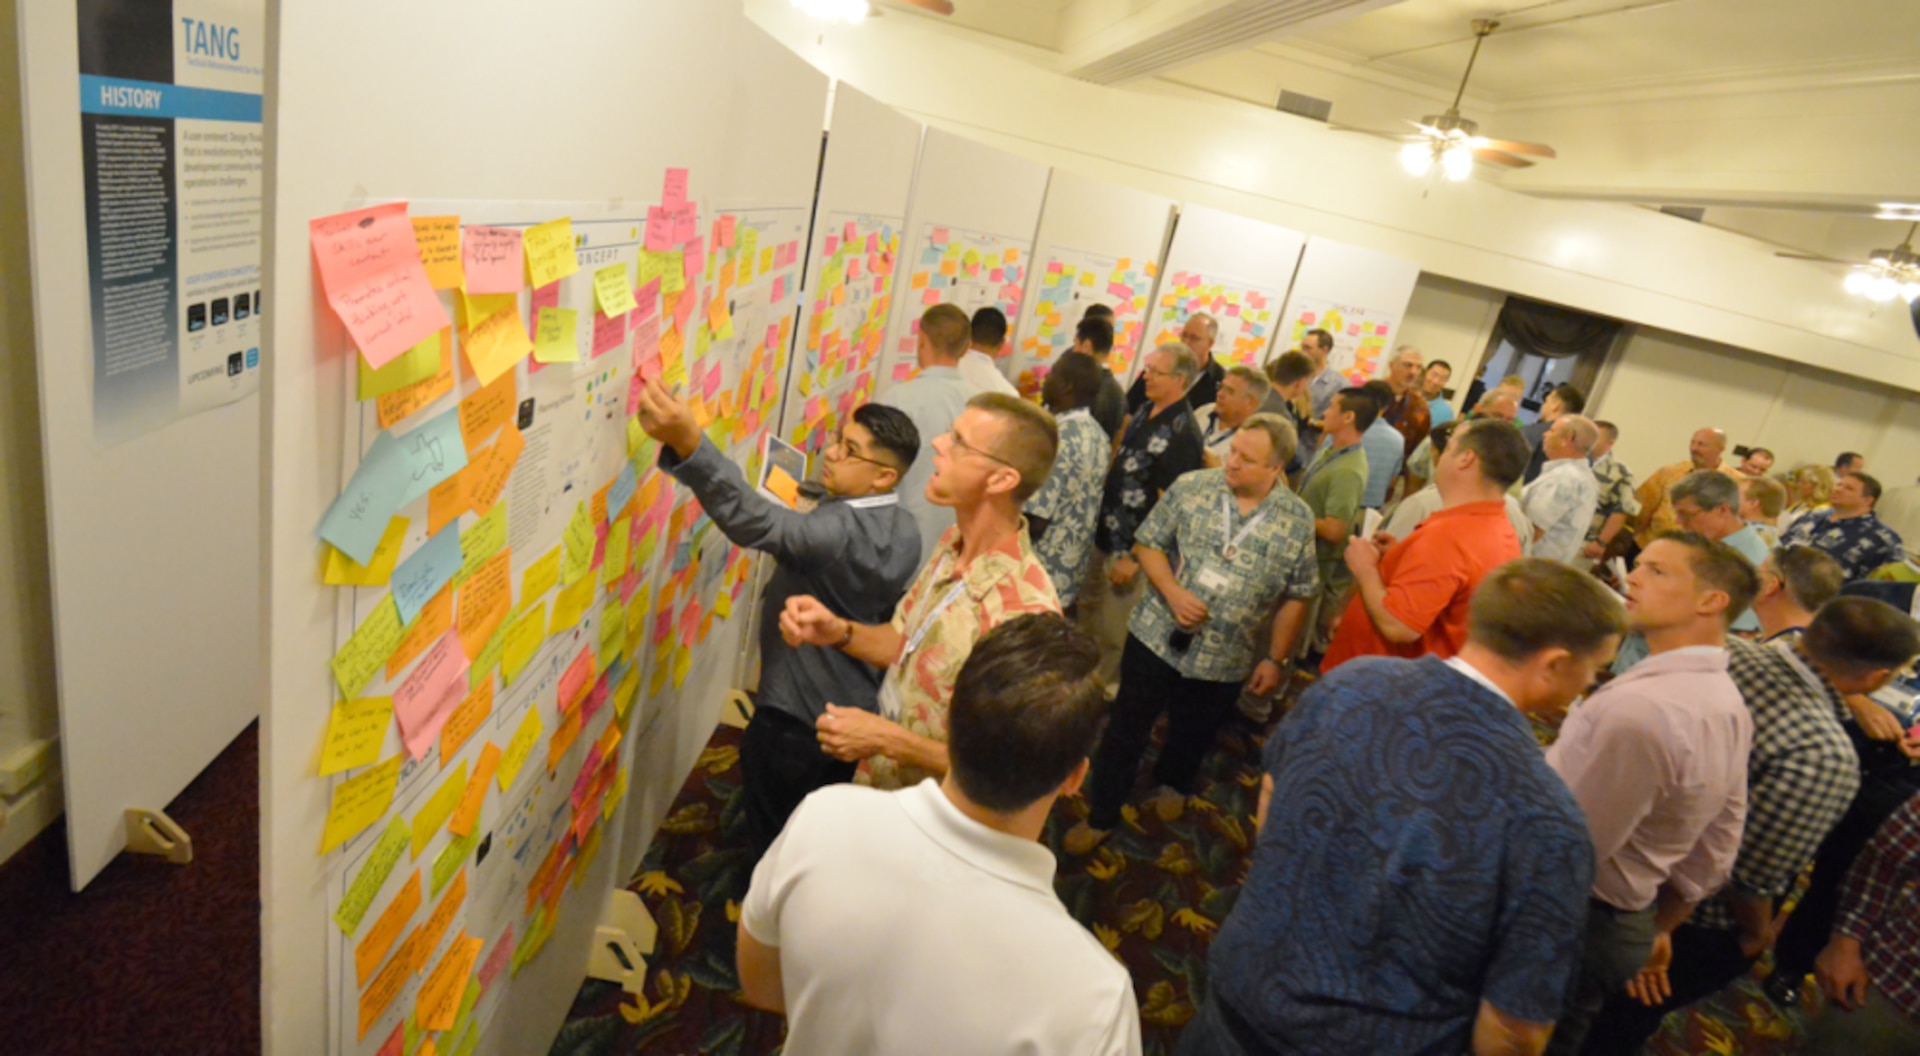 Tactical Advancements for the Next Generation (TANG) participants of the Integrated Air and Missile Defense (IAMD) Mission Planning Seminar post their likes, wishes, questions and concerns about pre-event concepts to kick-off the week. The TANG brings government civilians, contractors, enlisted and officer personnel together with commercial enterprises to tackle challenges through innovation.